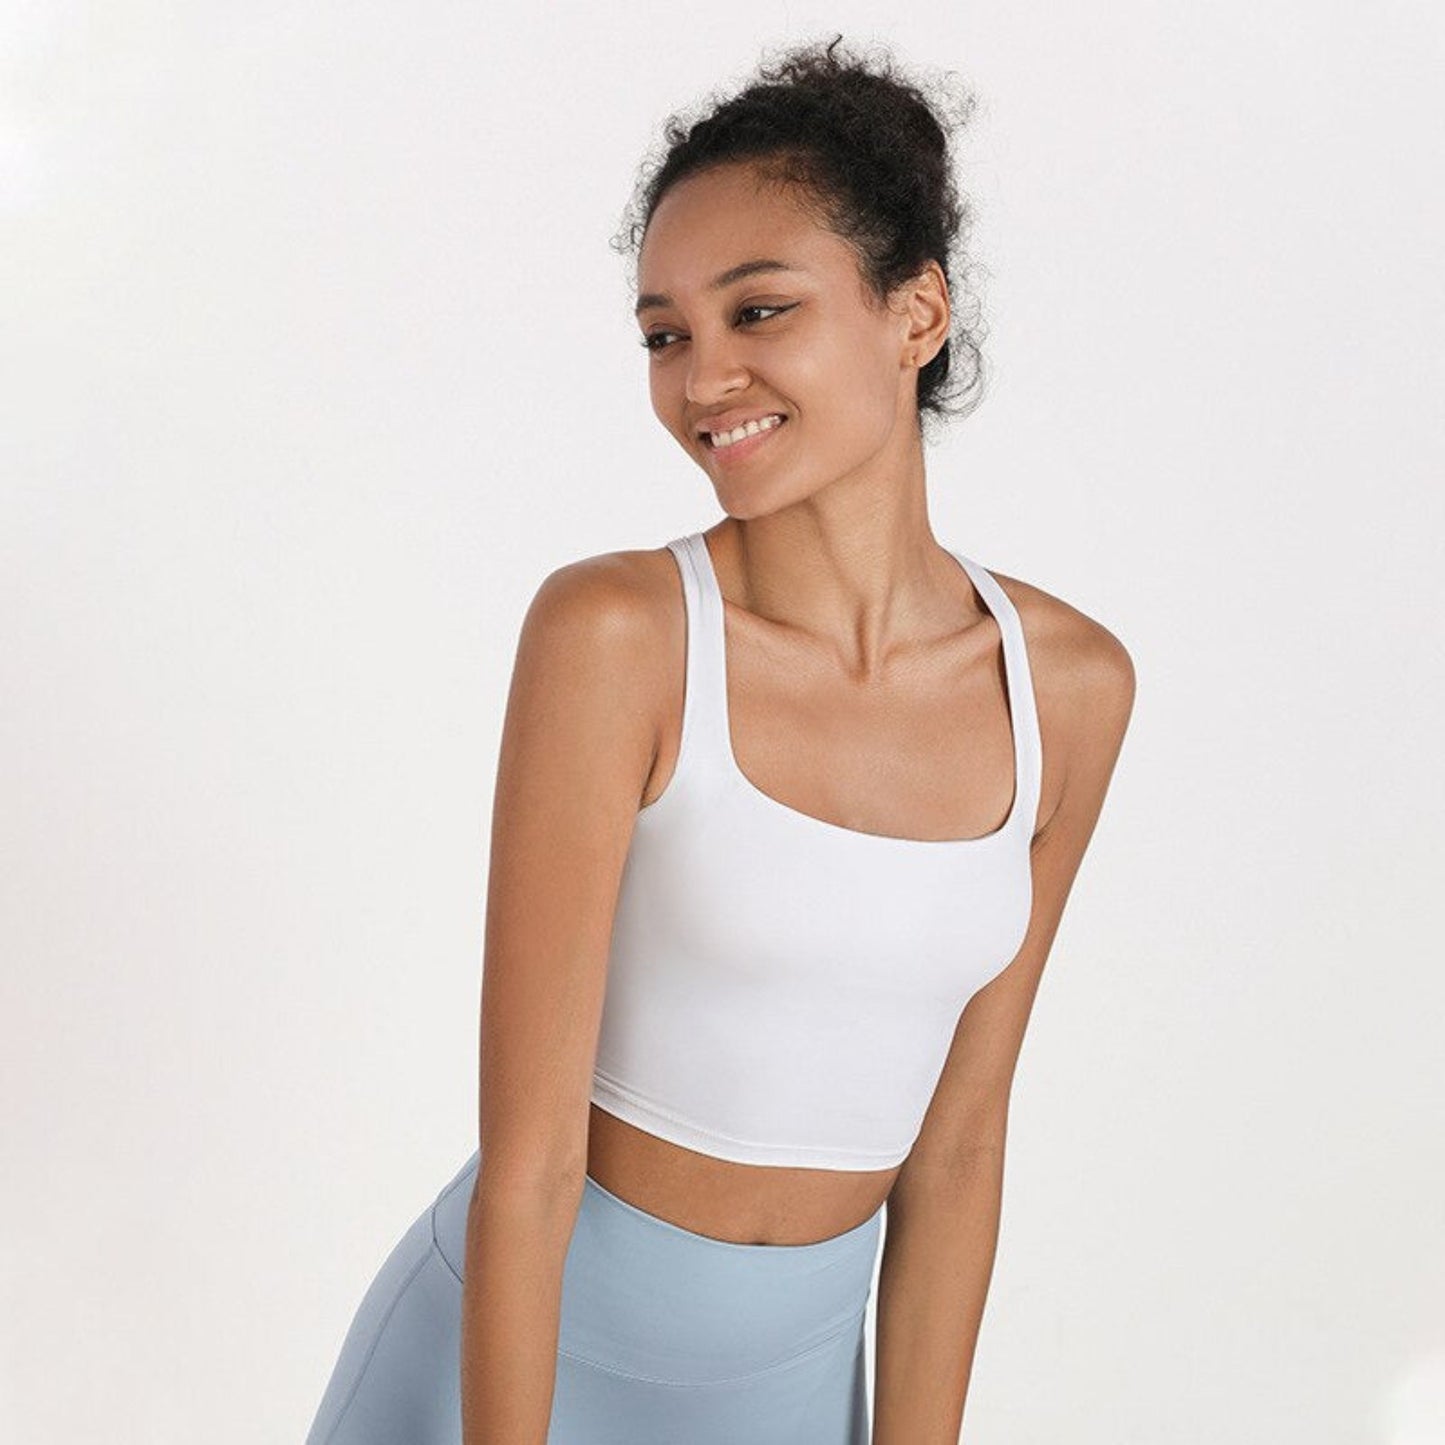 MODEL WEARING WHITE, SQUARED NECK CROP TOP FROM VIBRAS ACTIVEWEAR